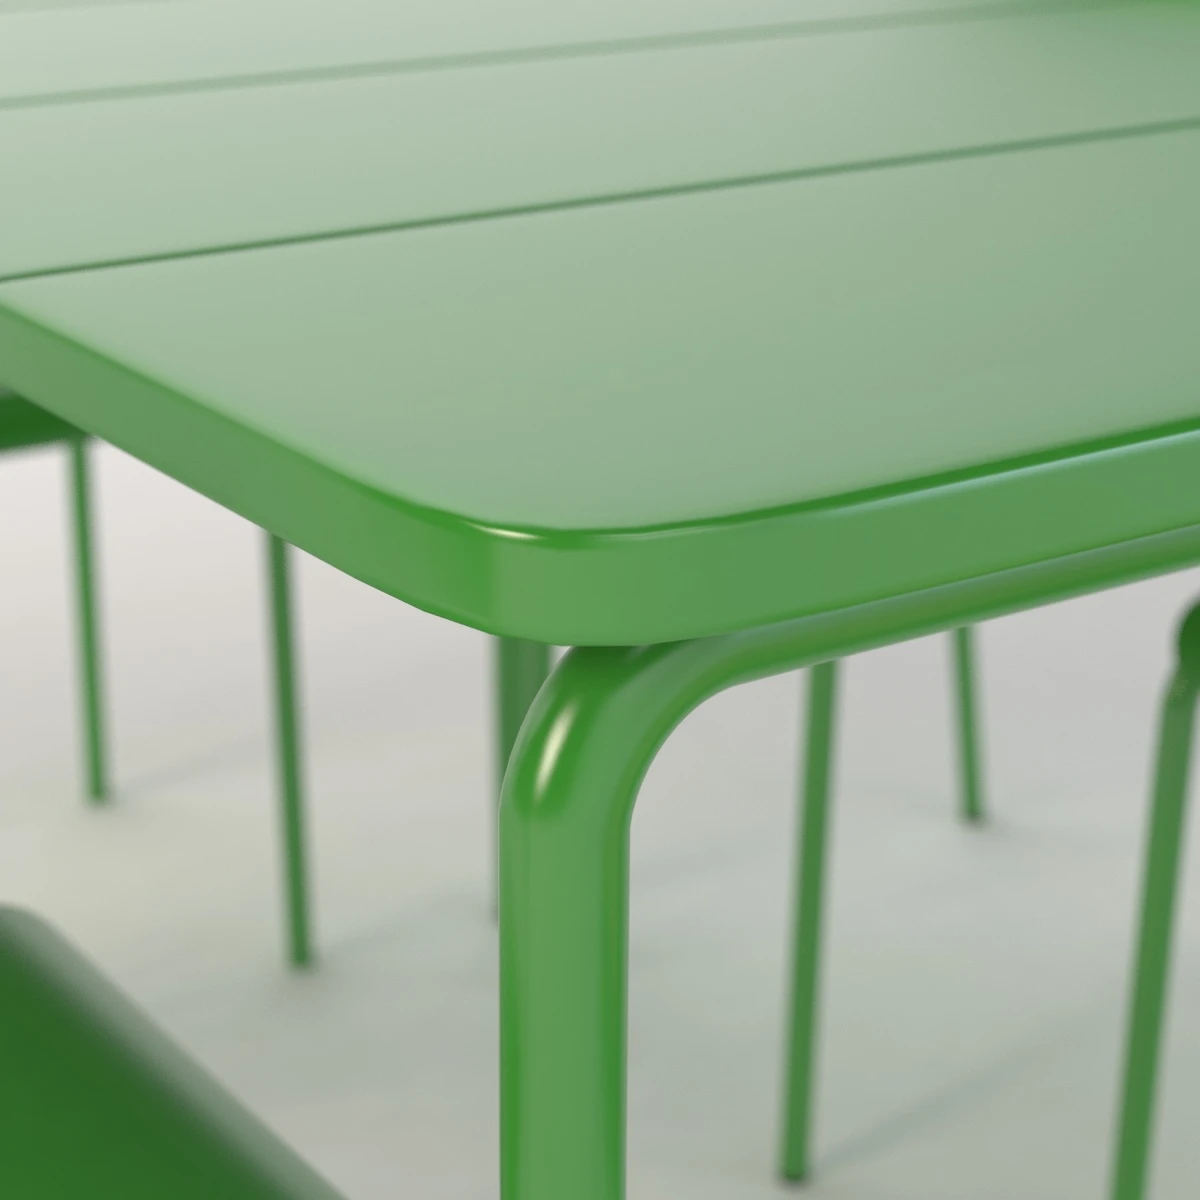 Ikea Vaddo Outdoor Chair Stool Table 3D Model_09